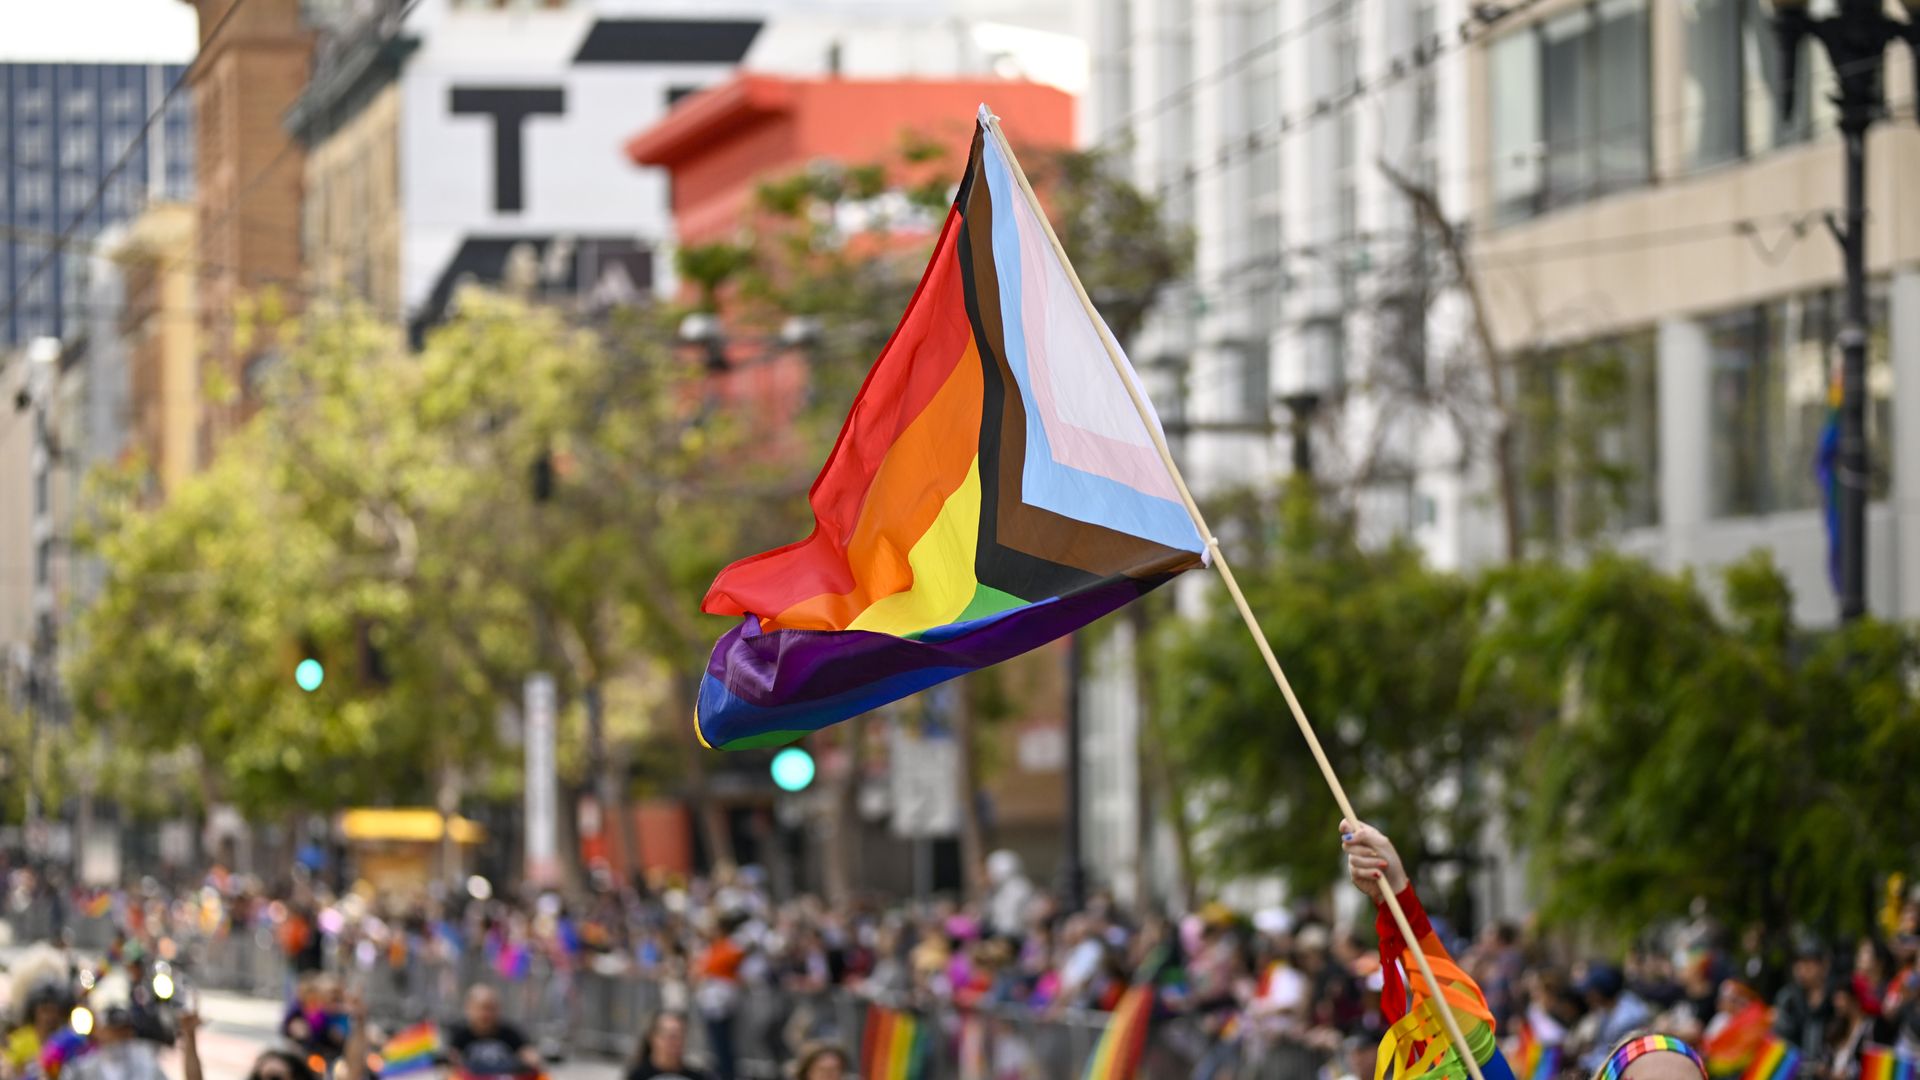 Photo of an LGBTQ pride flag raised in the air as part of a Pride parade in the streets